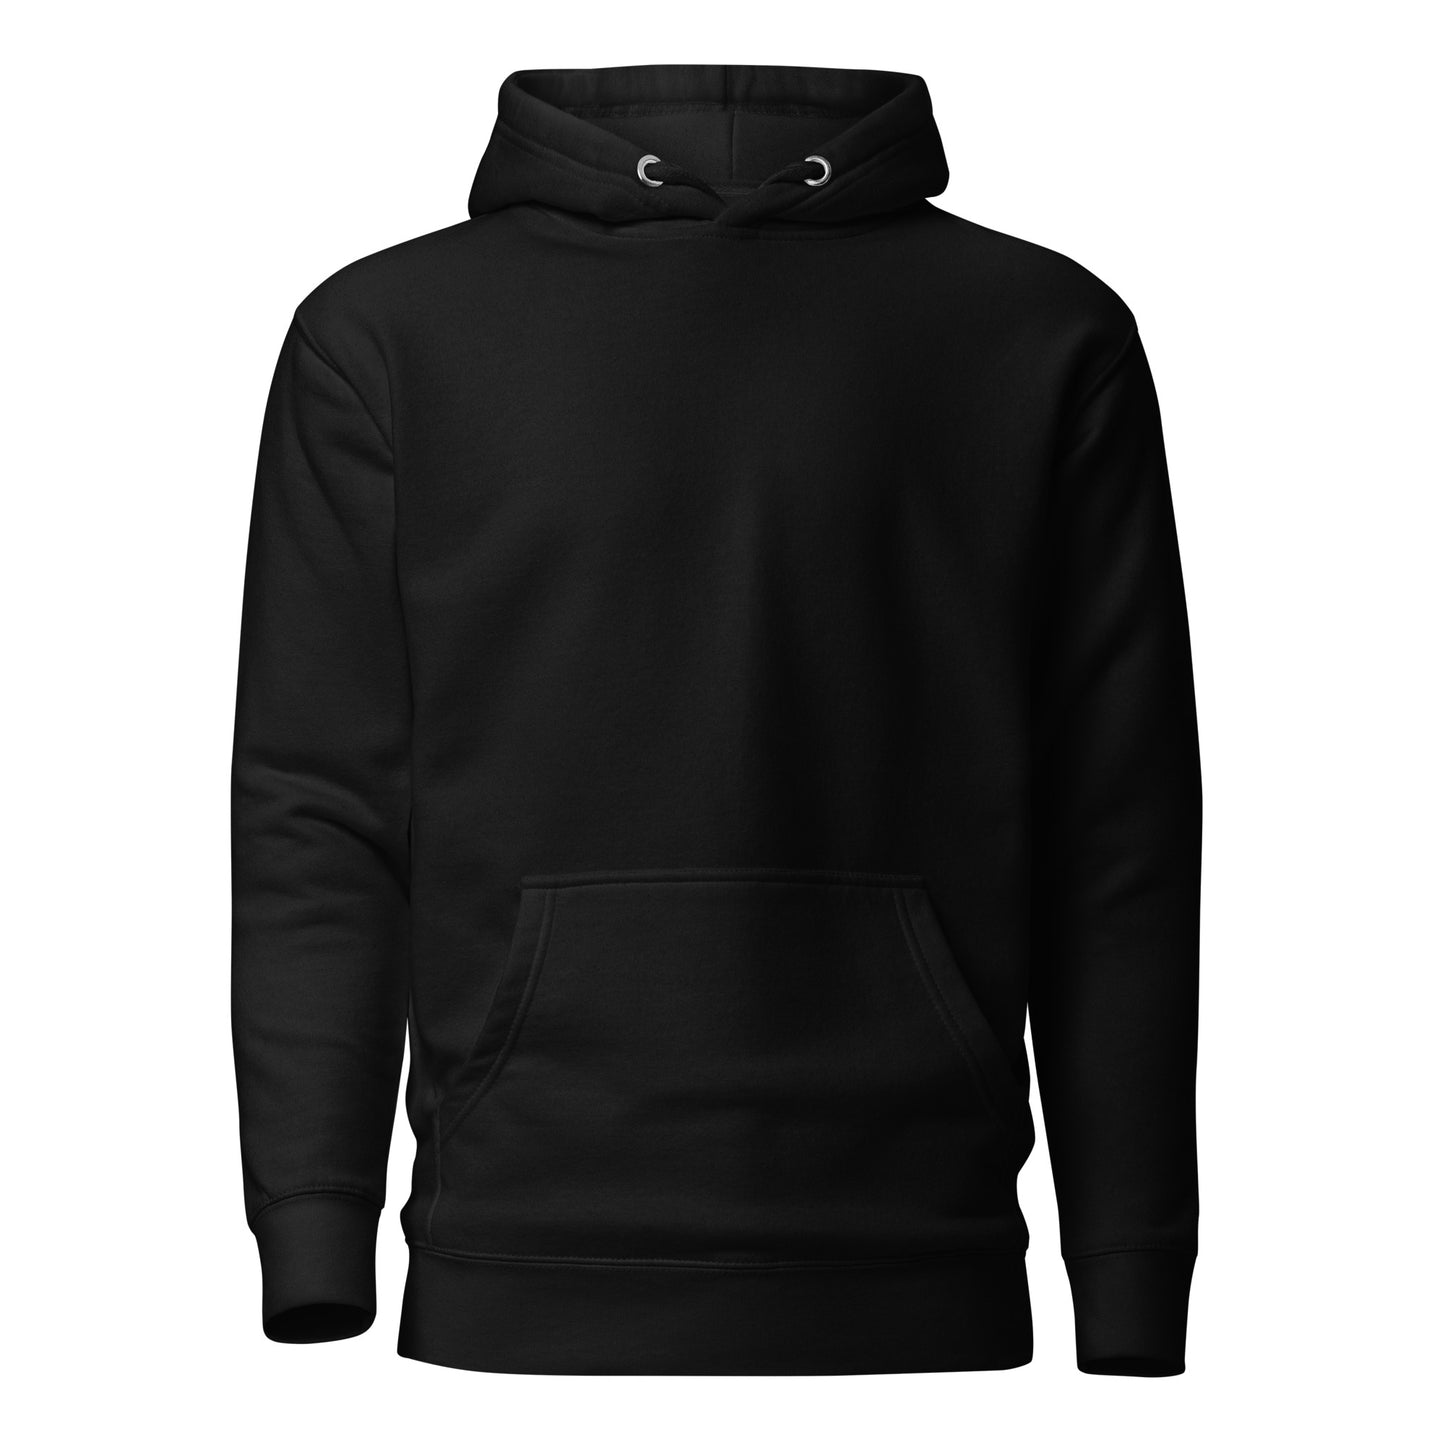 Whiskey Soft Style Mass Cast Hoodie